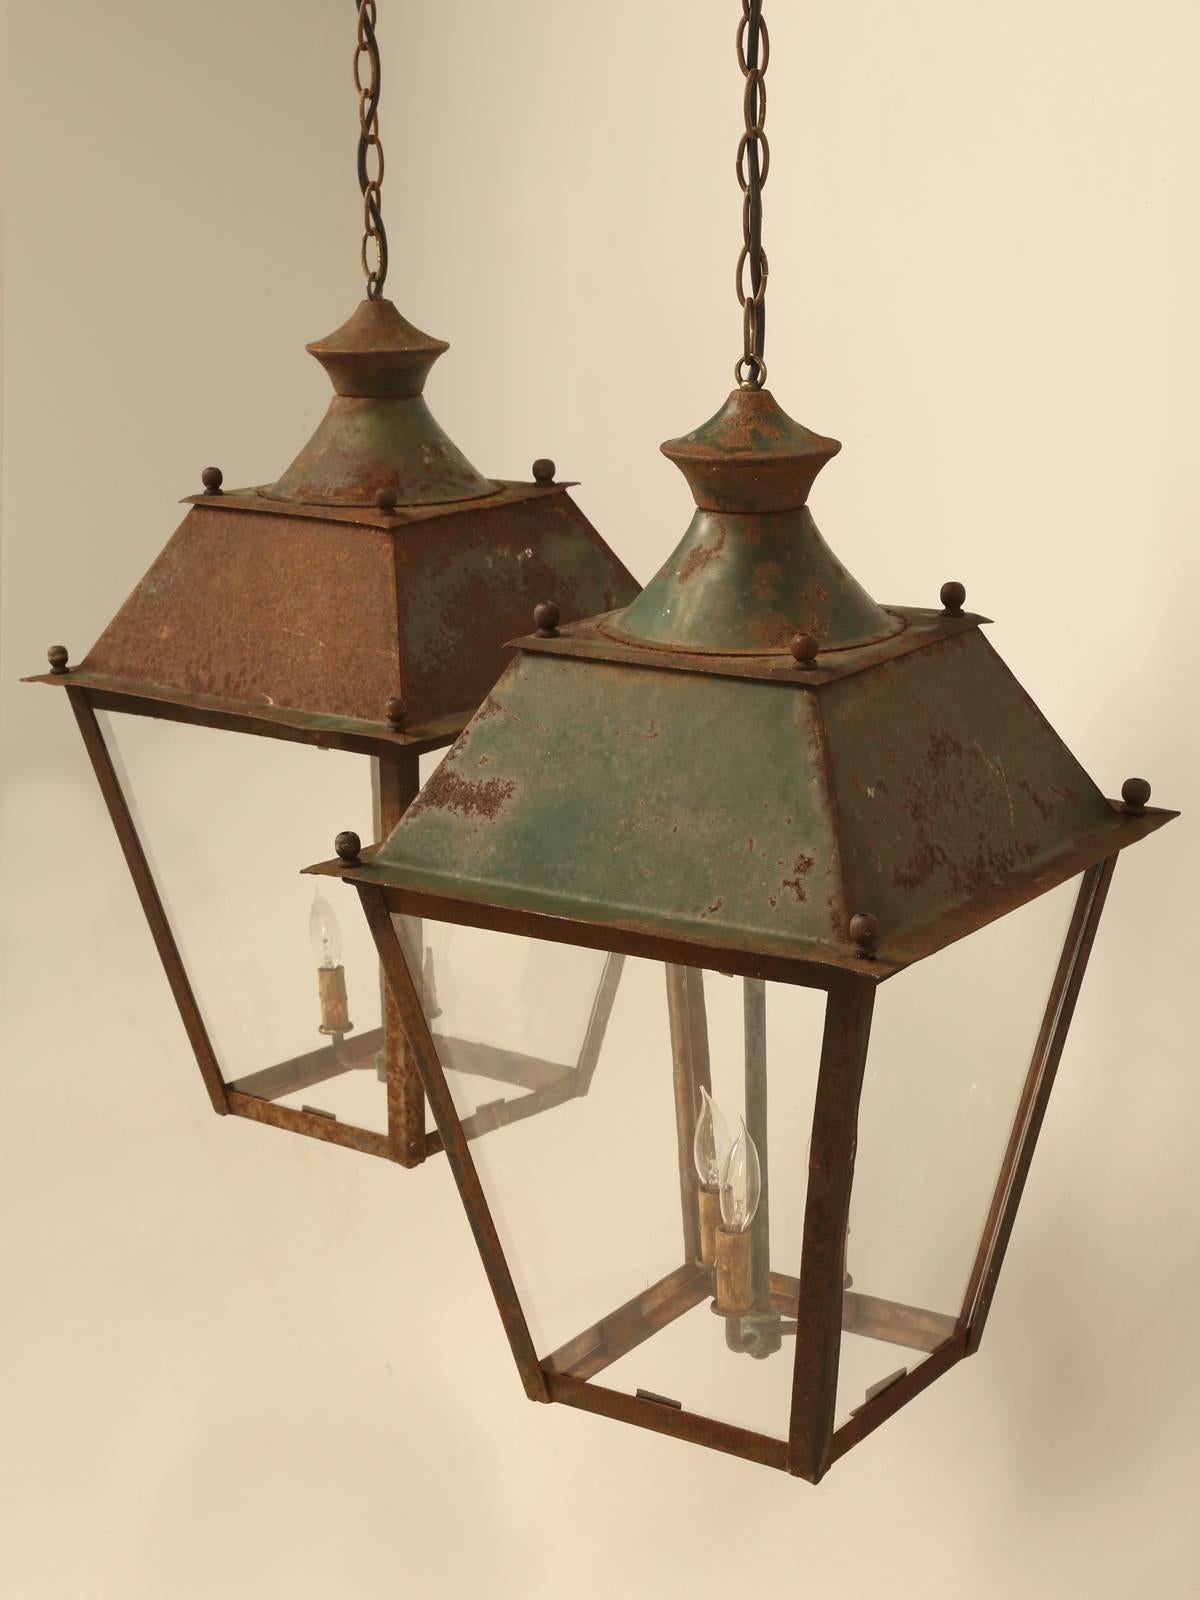 Matched pair of French hanging indoor, or outdoor lanterns in their original paint. We struggled a bit whether or not to refinish the exteriors, but we just loved the hints of old green paint showing and could not bring ourselves to cover it up.